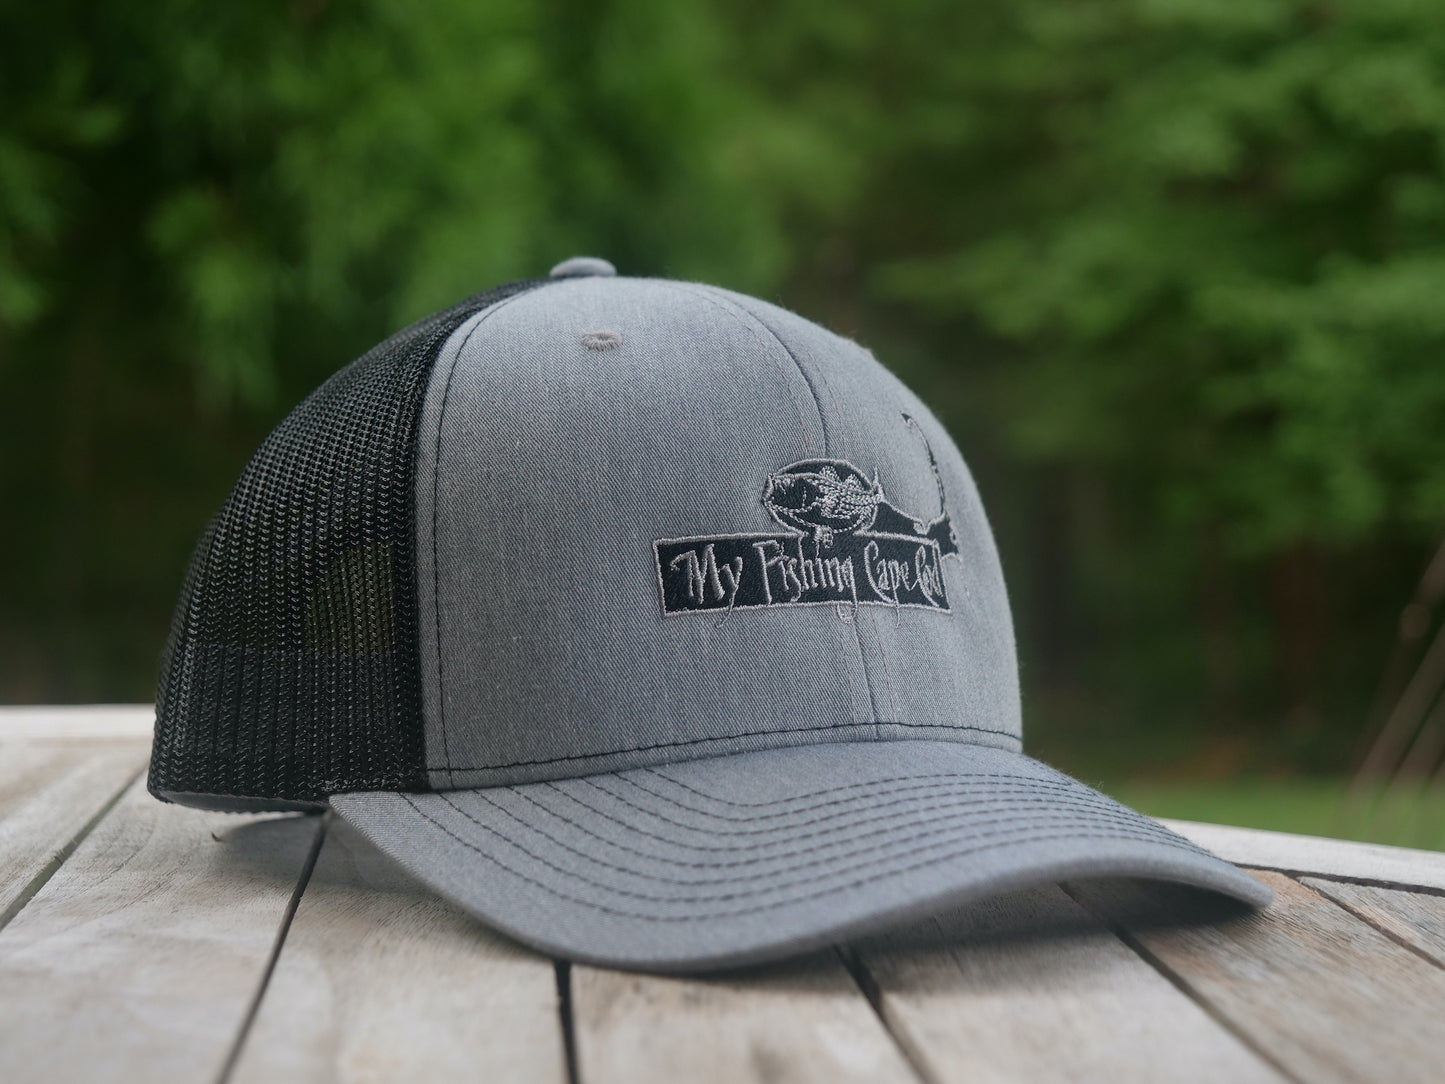 MFCC Hat (members get 25% discount)